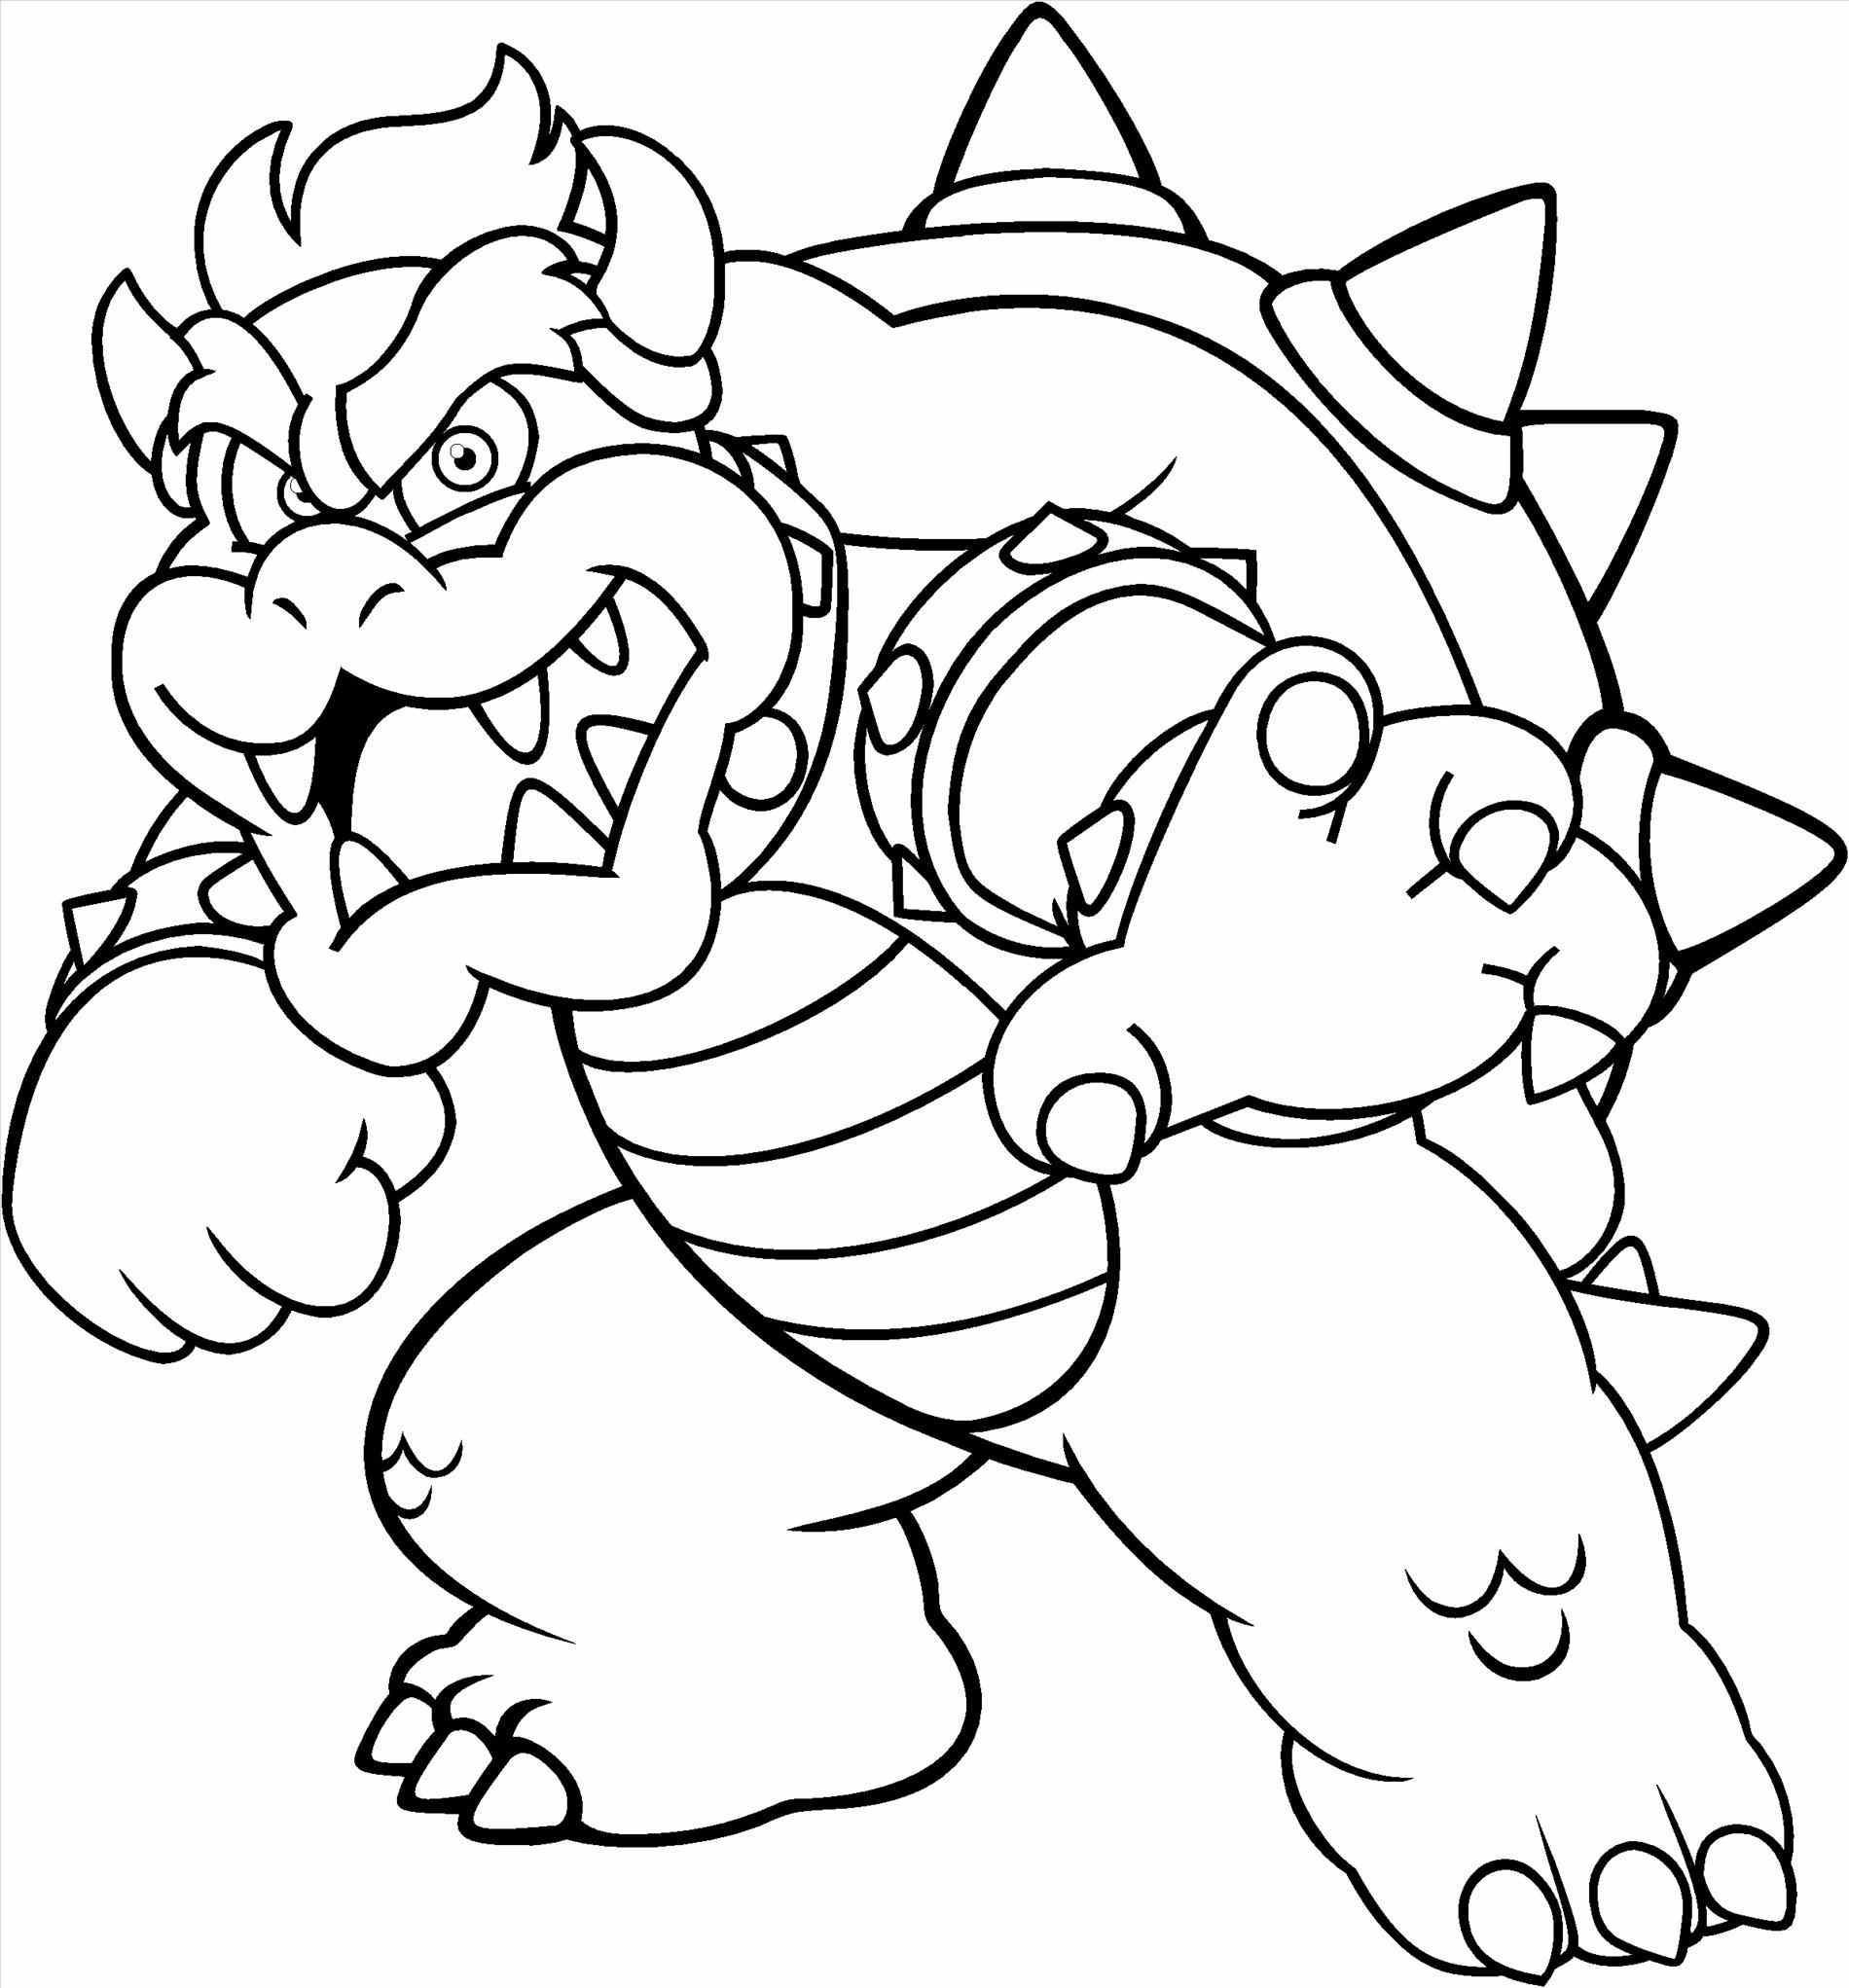 Coloring Pages : Coloring Pages Marioey Pauline Printable To Print Super Nintendo  Switch Phenomenal Mario Odyssey Coloring Pages Image Ideas ~ Off-The Wall  ATL